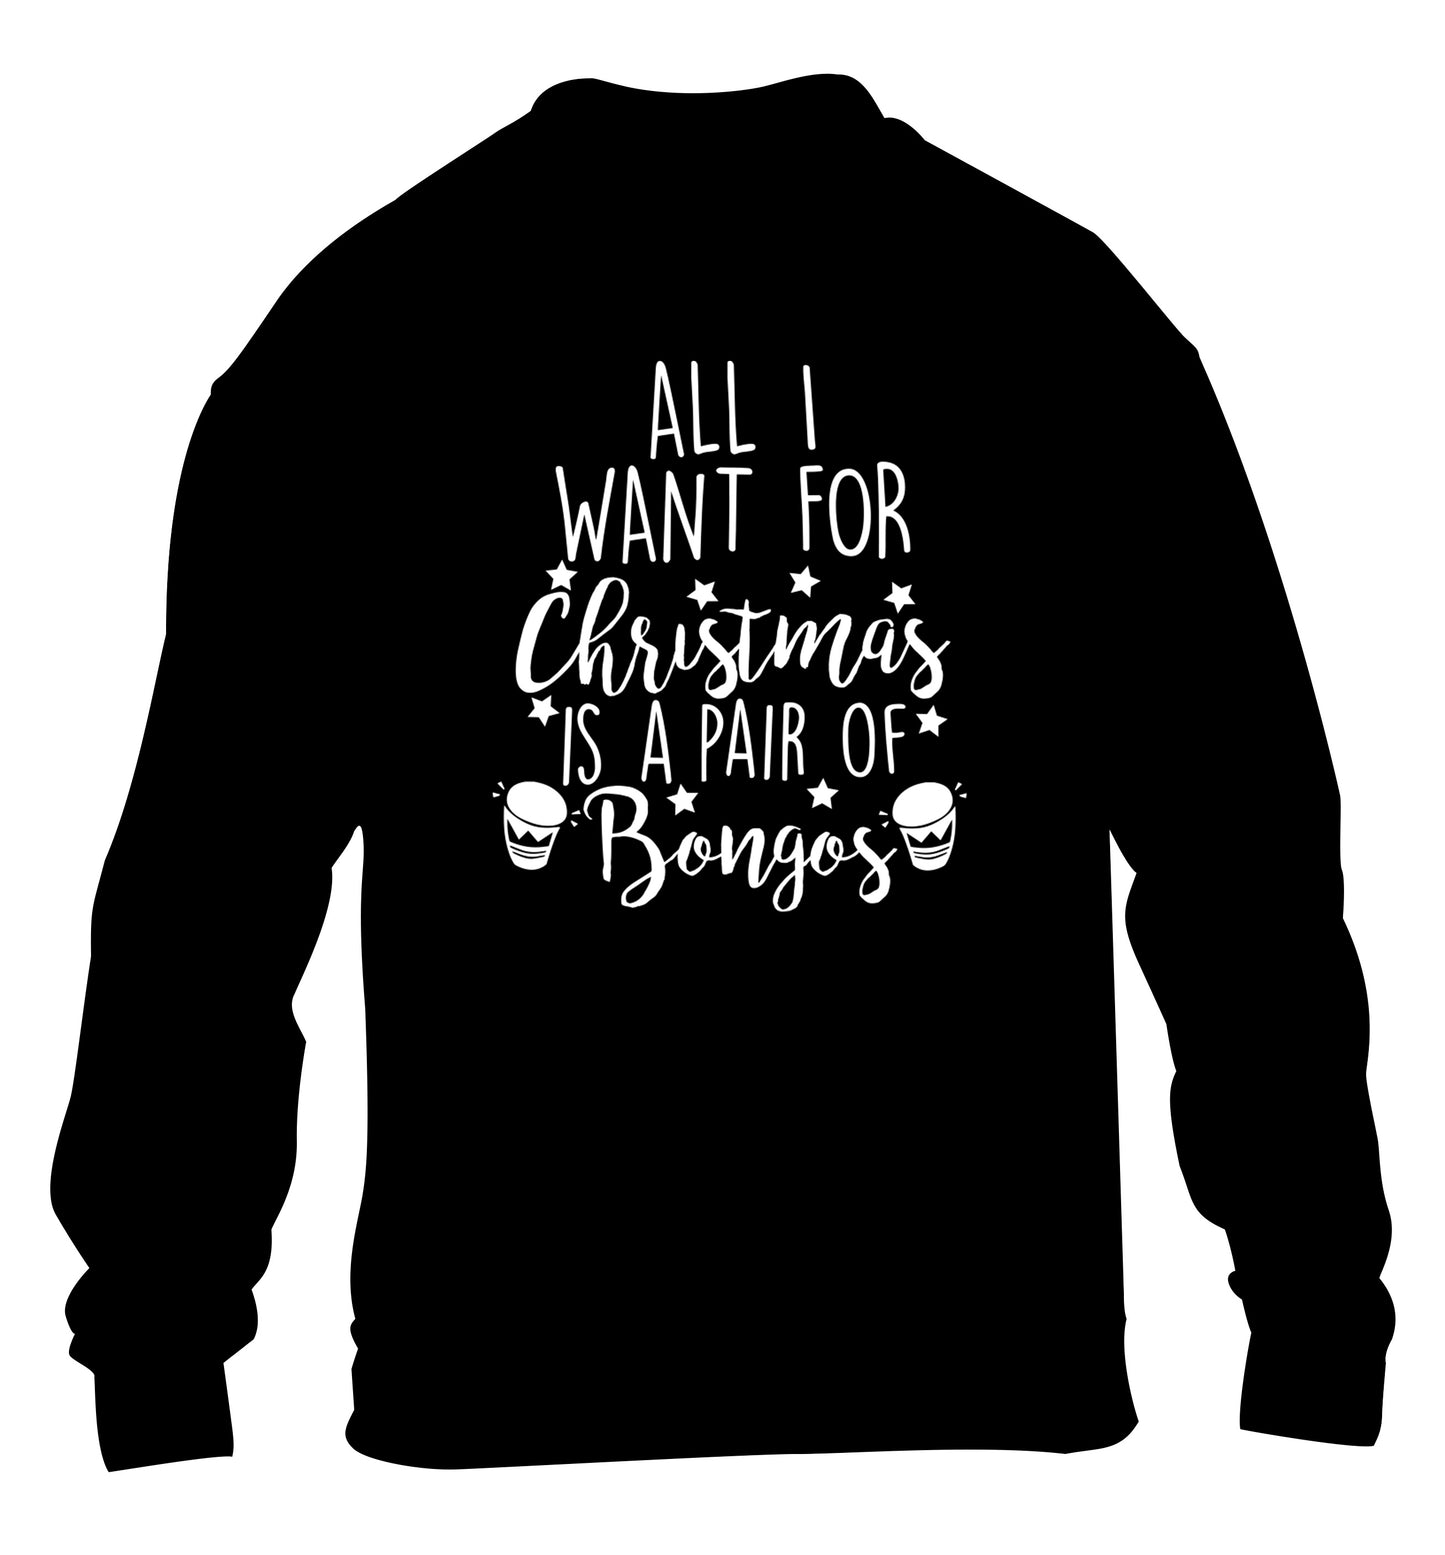 All I want for Christmas is a pair of bongos! children's black sweater 12-14 Years